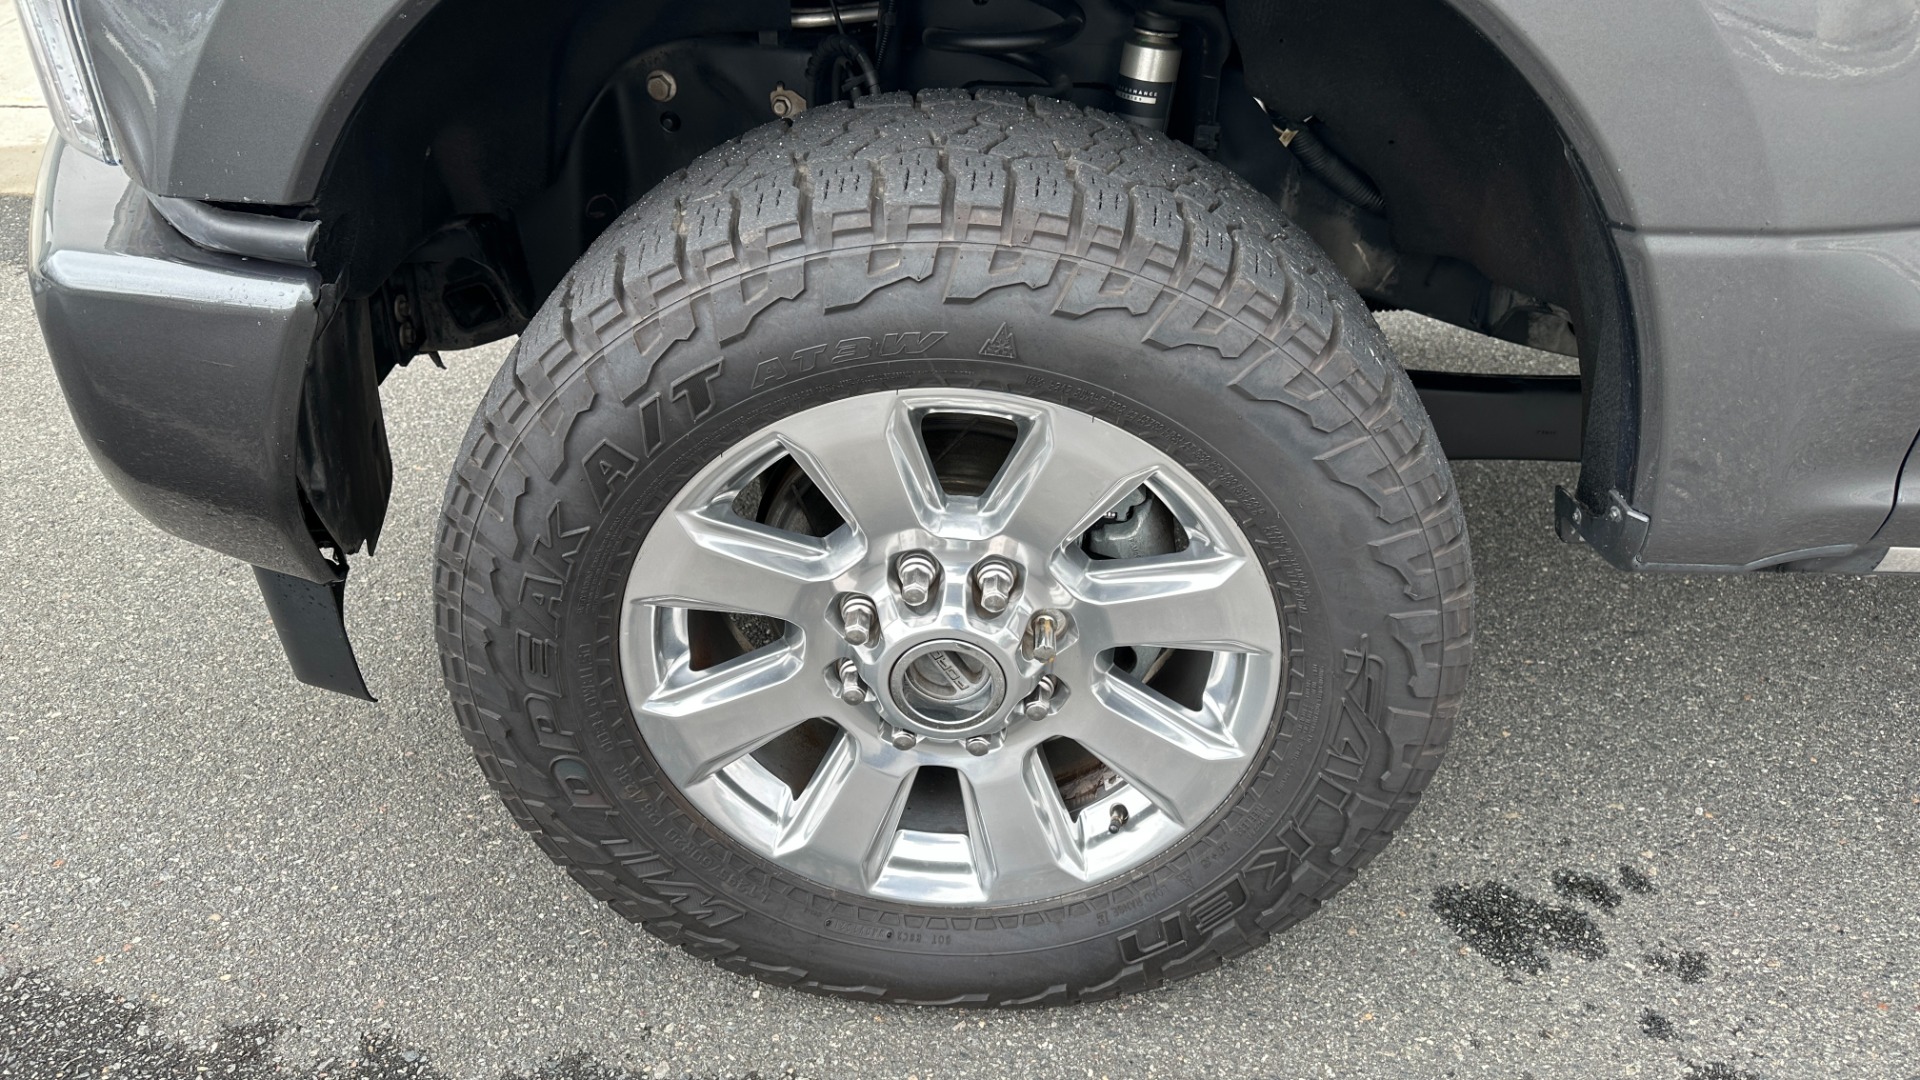 Used 2017 Ford Super Duty F-250 SRW PLATINUM / FOX SHOCKS / 6.7 DIESEL / FX4 OFFROAD / ADAPTIVE CRUISE for sale $54,995 at Formula Imports in Charlotte NC 28227 48